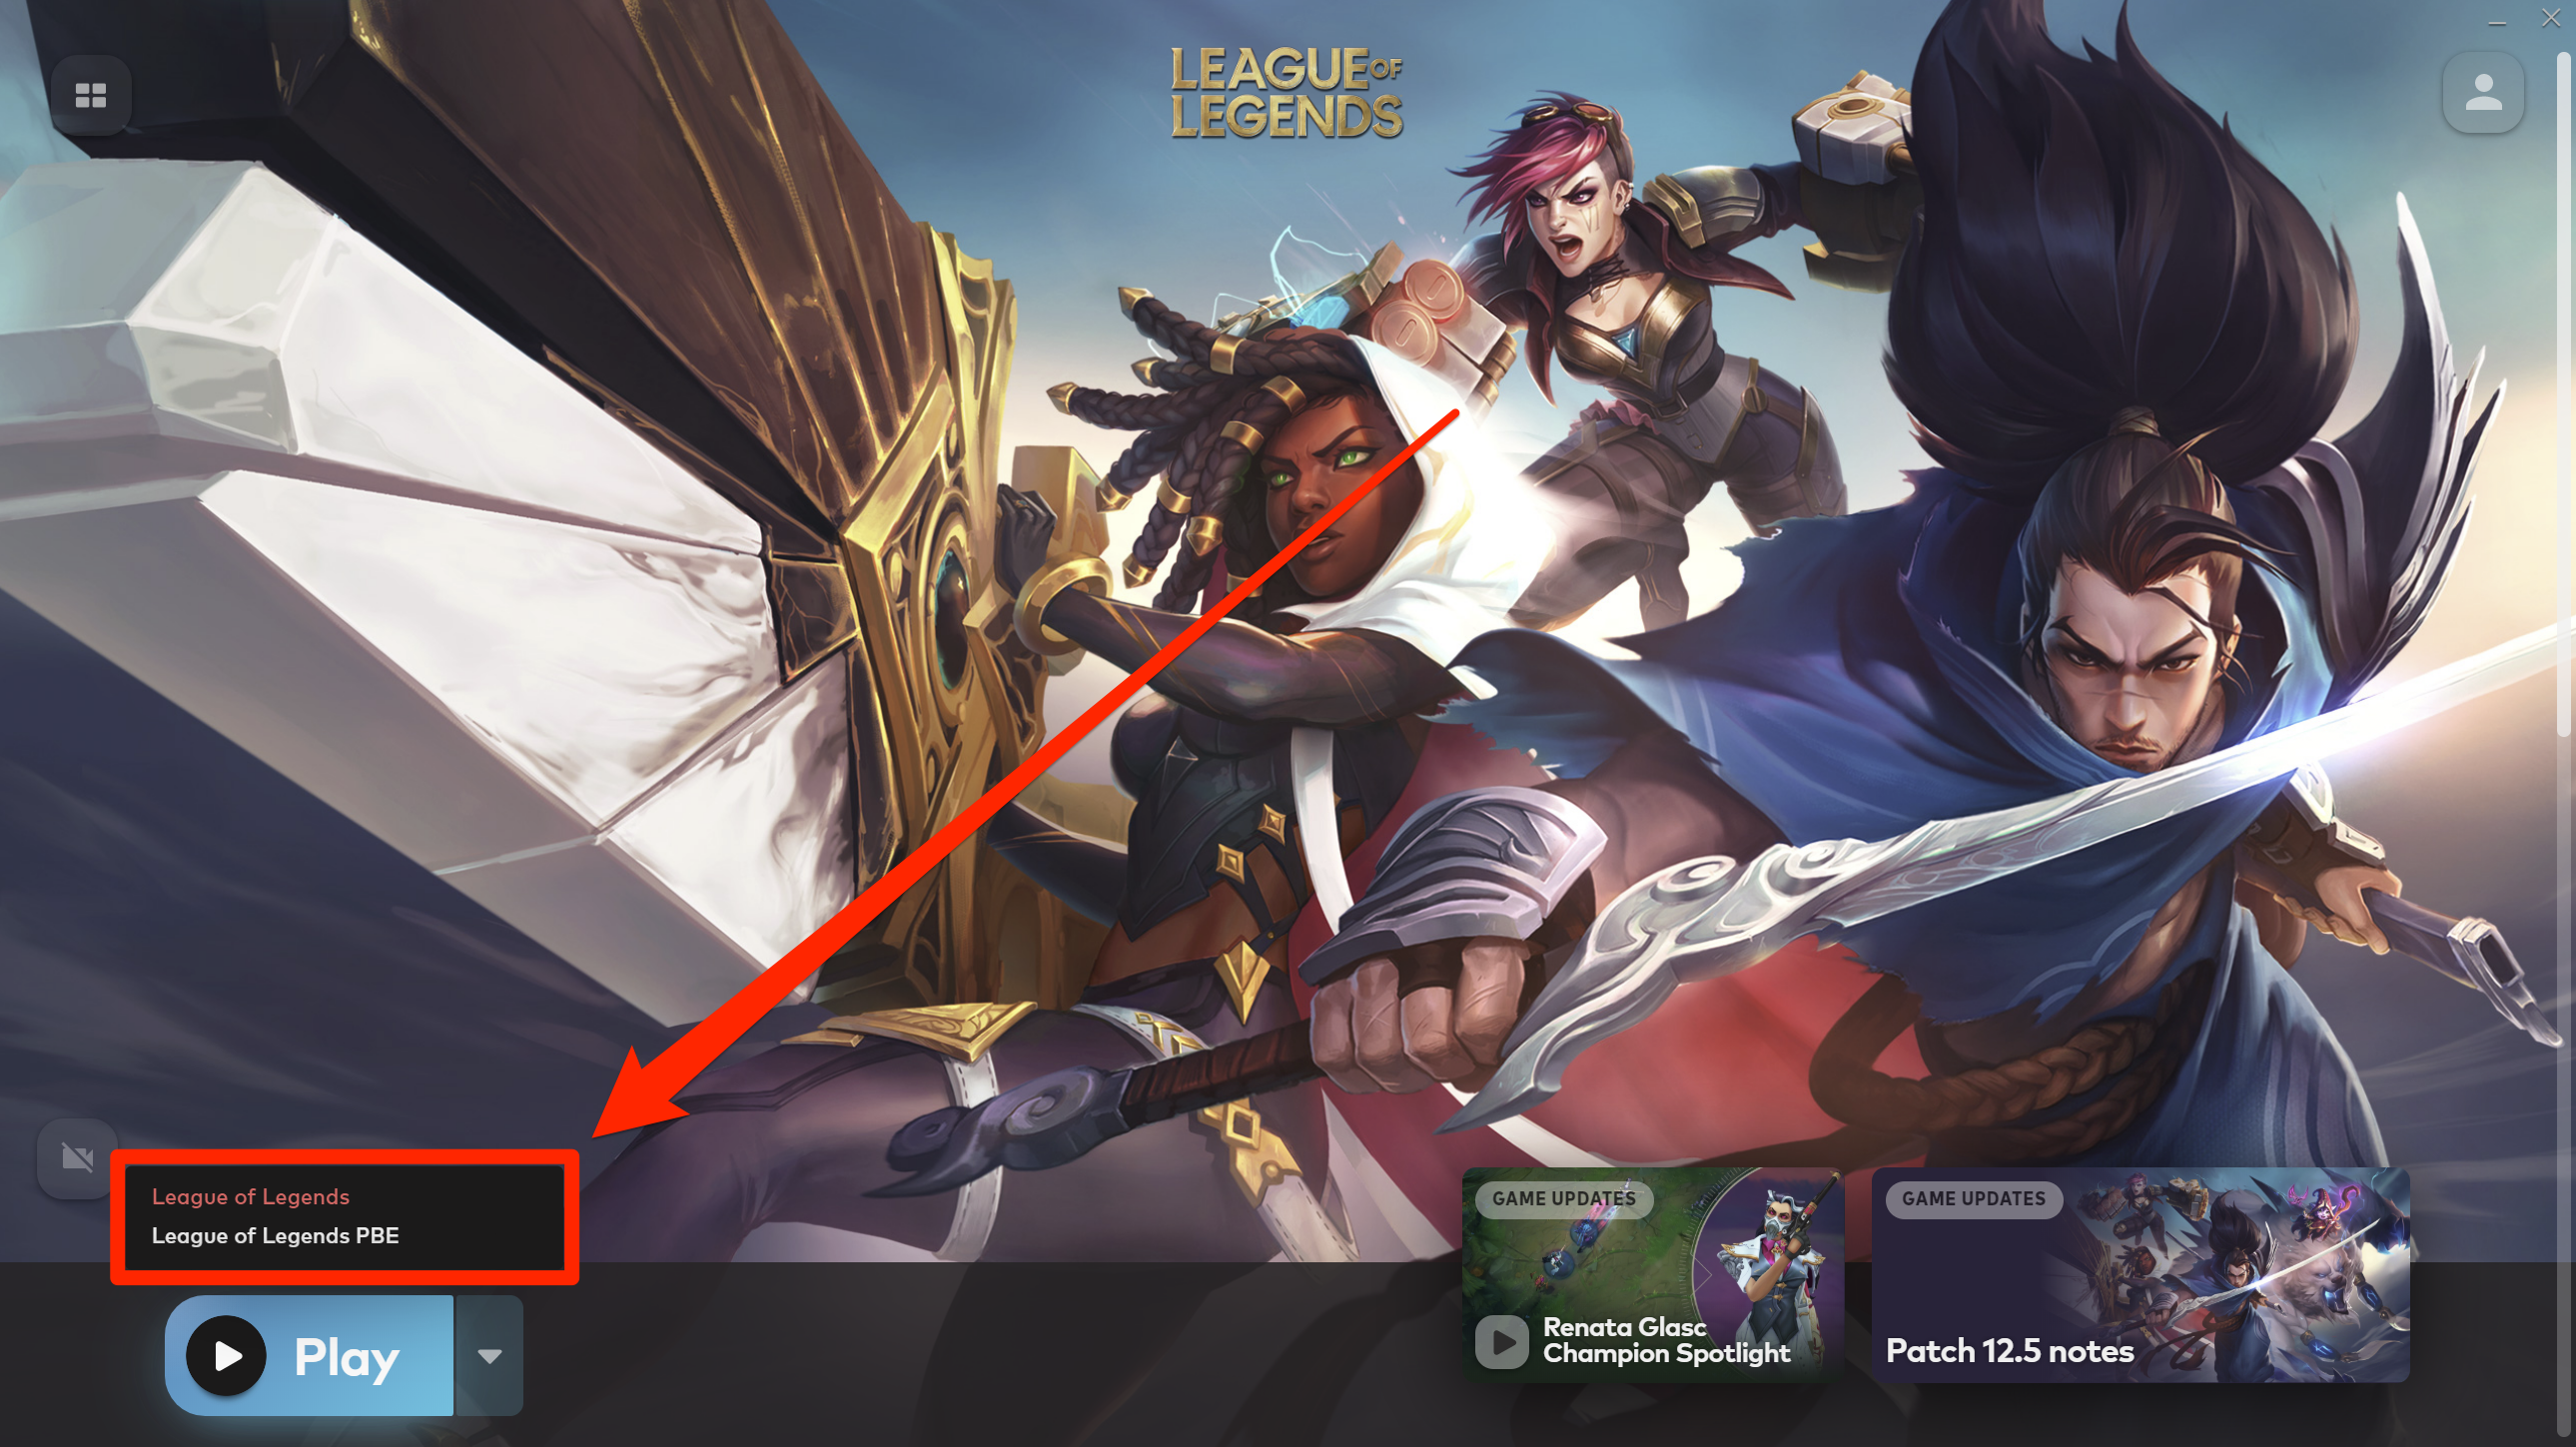 The introduction page for the League of Legends client. The "League of Legends PBE" option is highlighted.